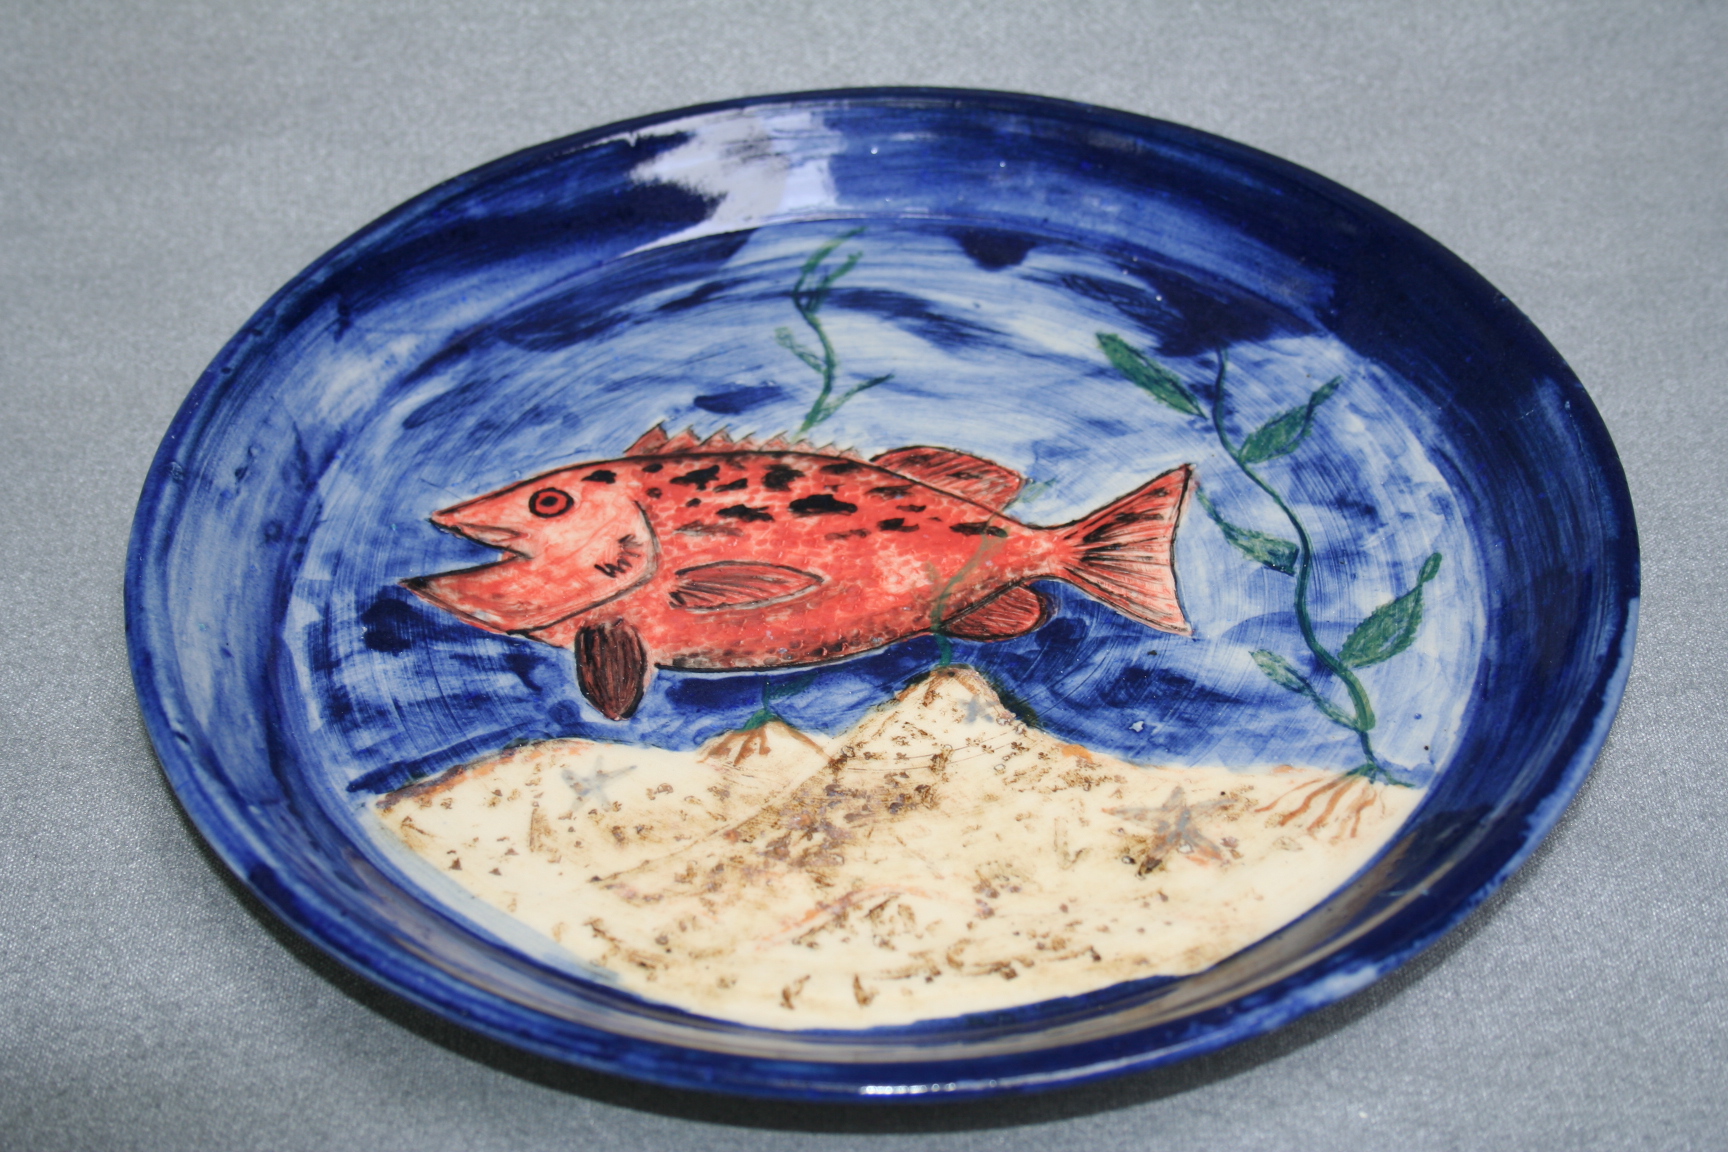 A ceramic plate along with a freshly painted fish over the base